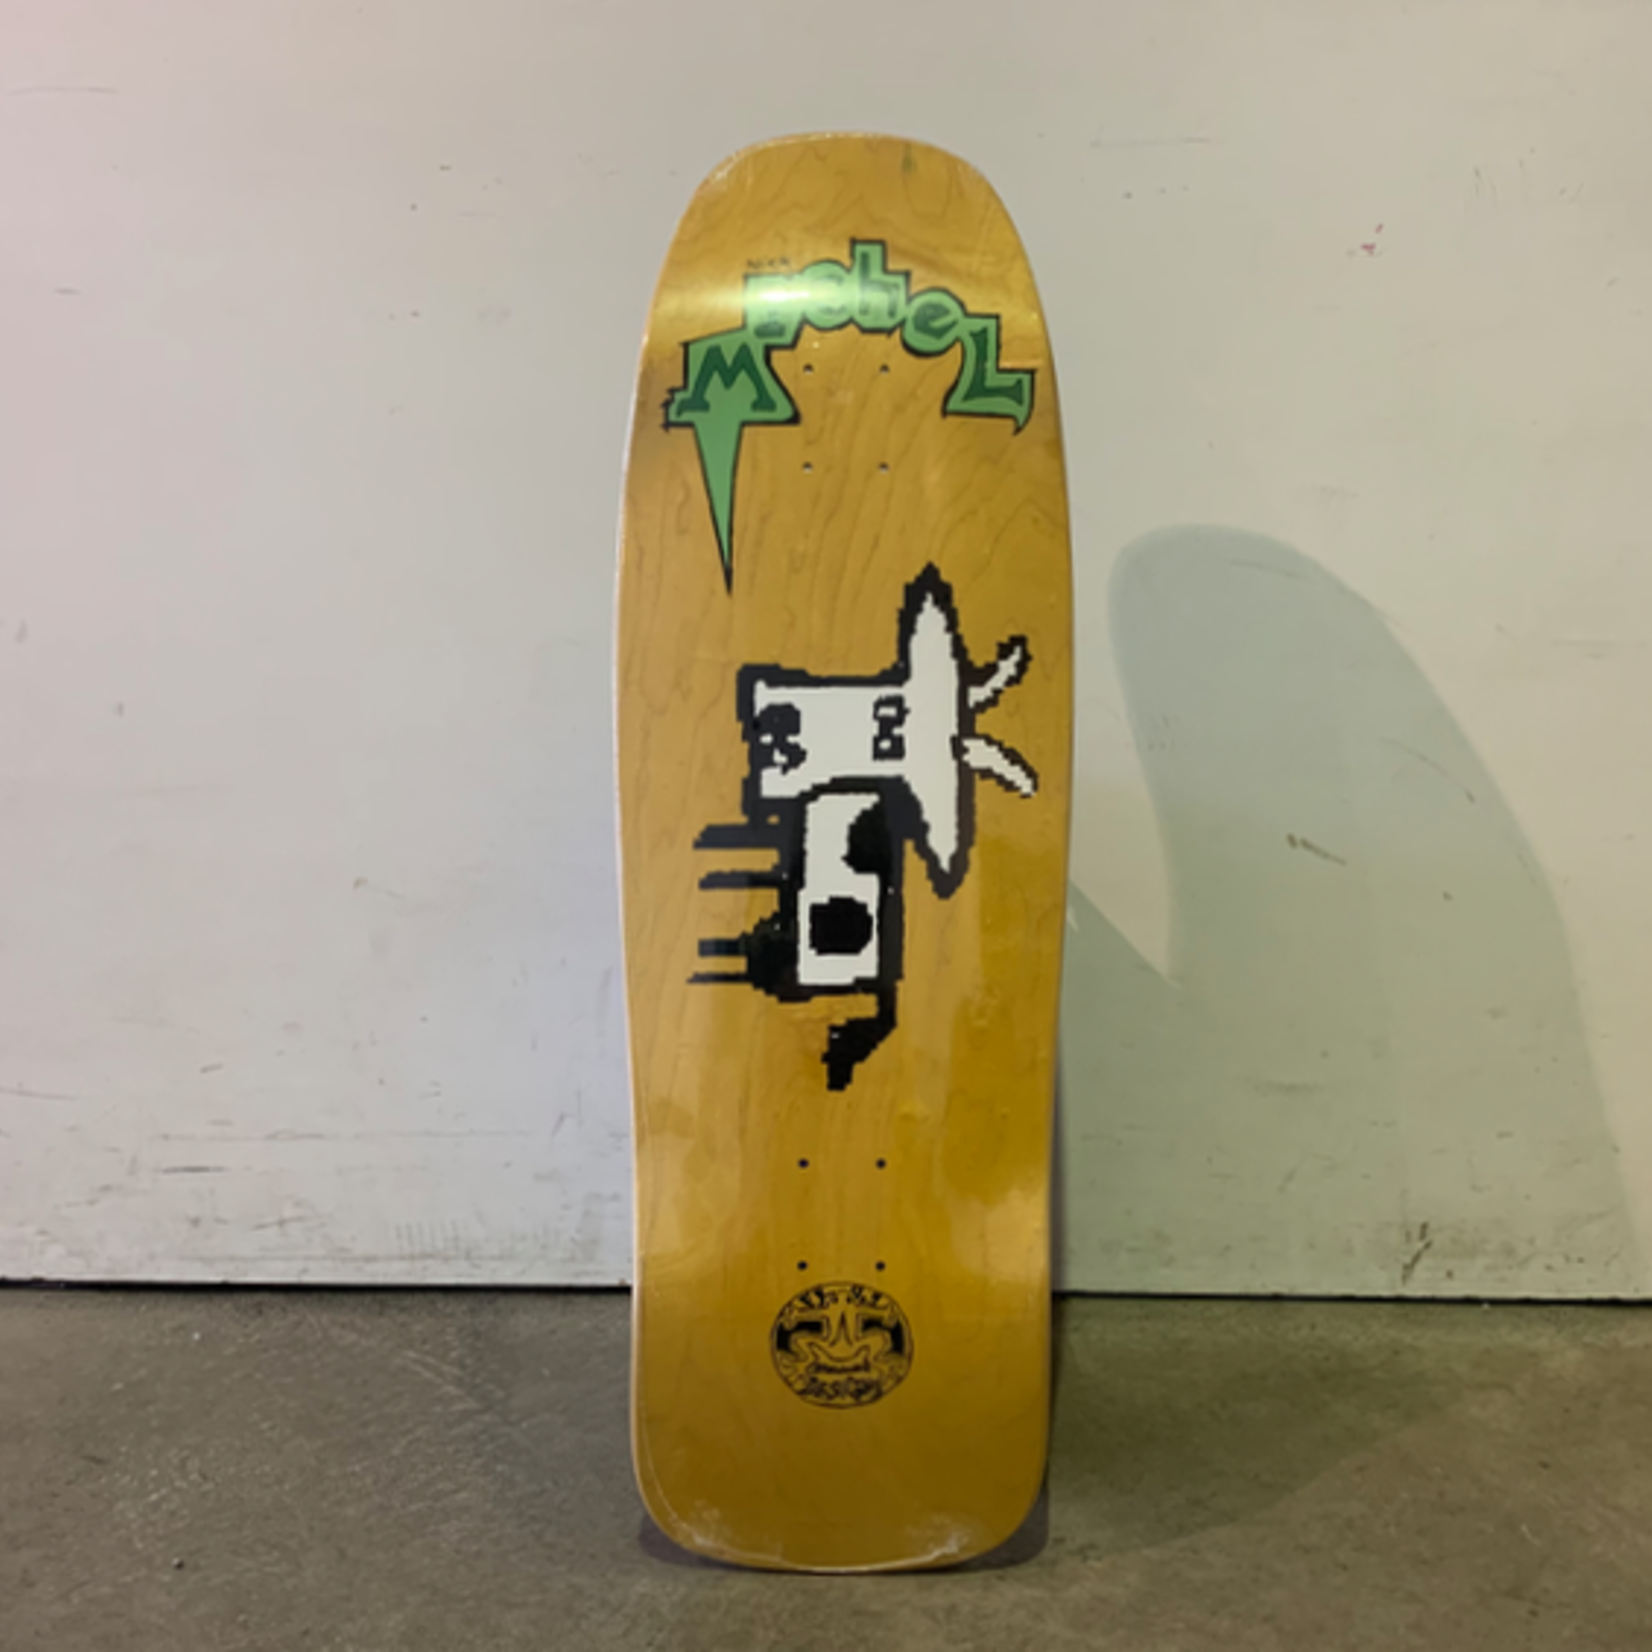 Frog Frog Skateboard 10.0 - Michel Pure Cow